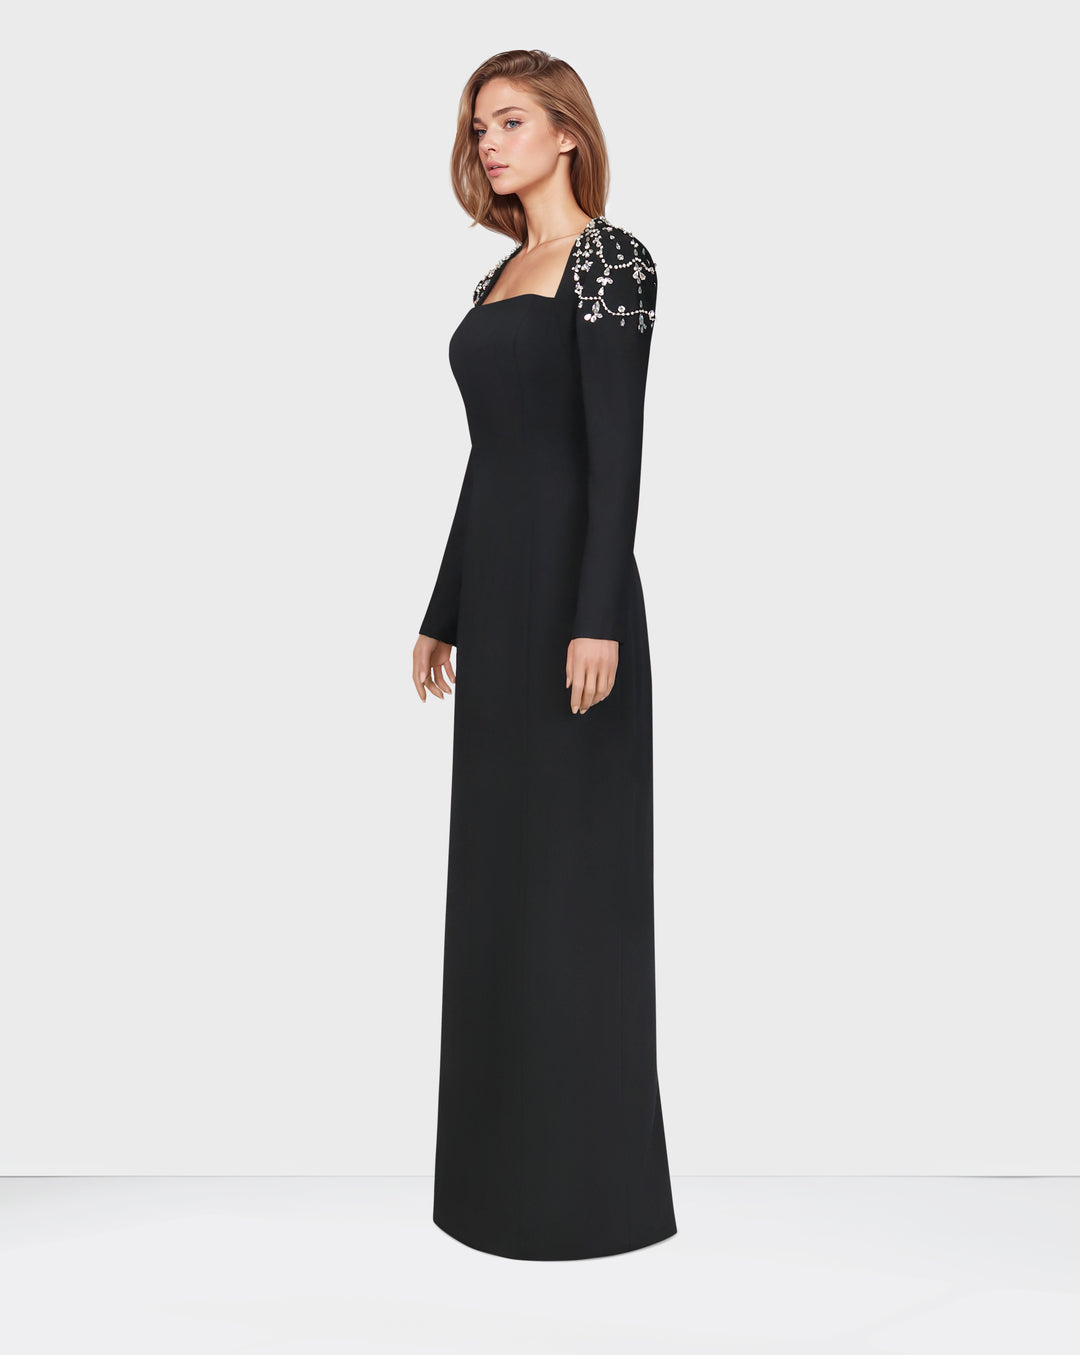 Black column dress with beaded shoulders and long sleeves -ODD-Telqo